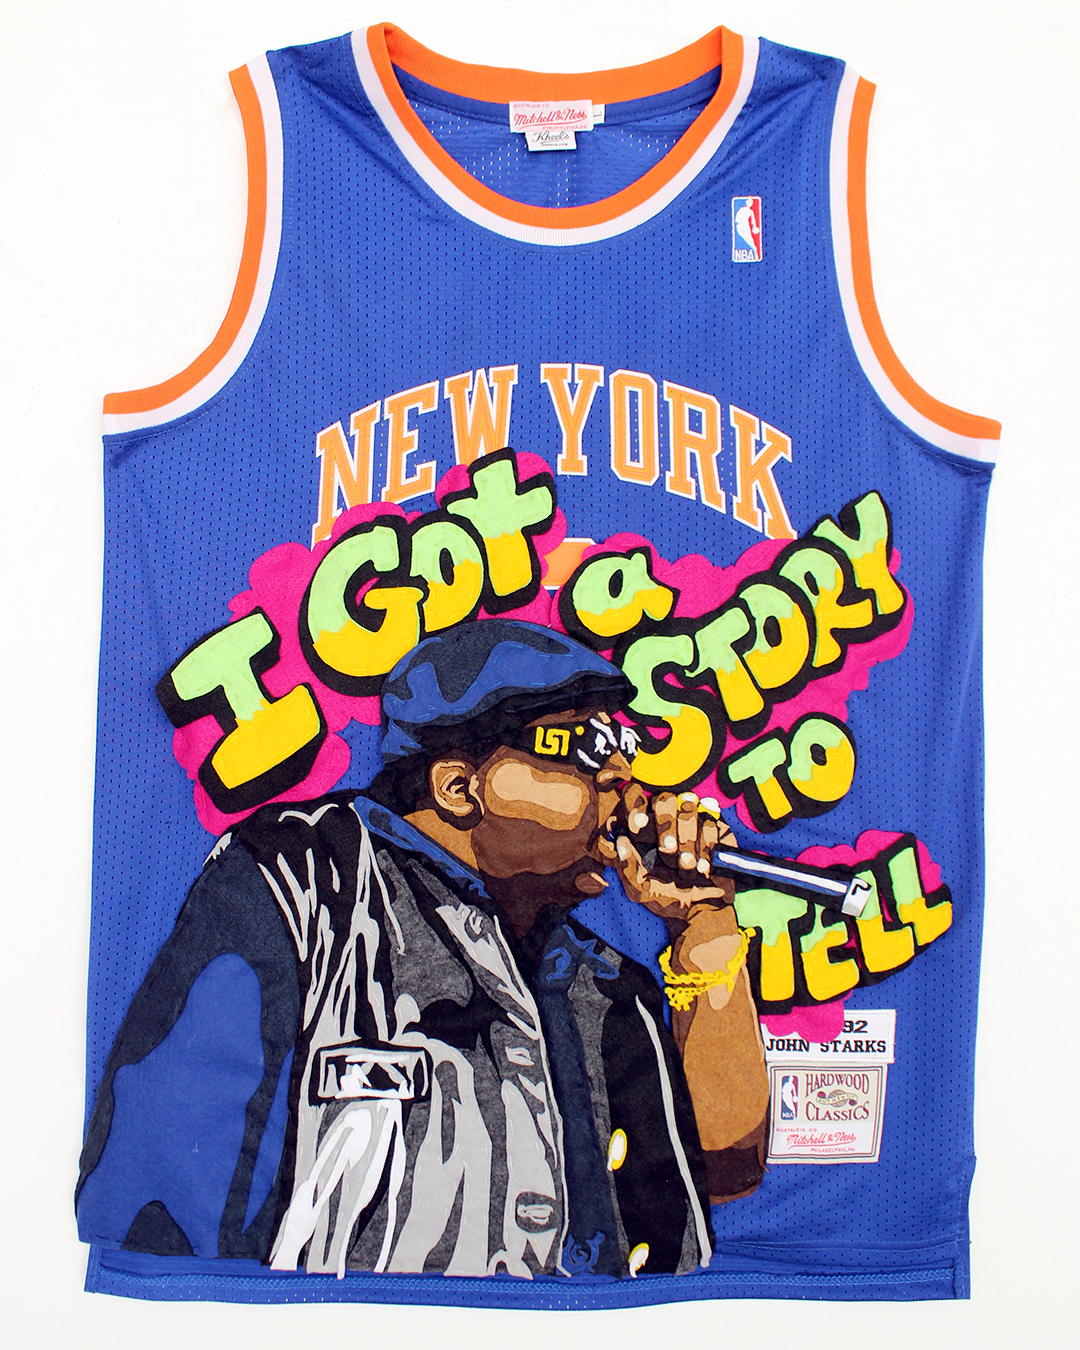 biggie story to tell knicks jersey 1.png